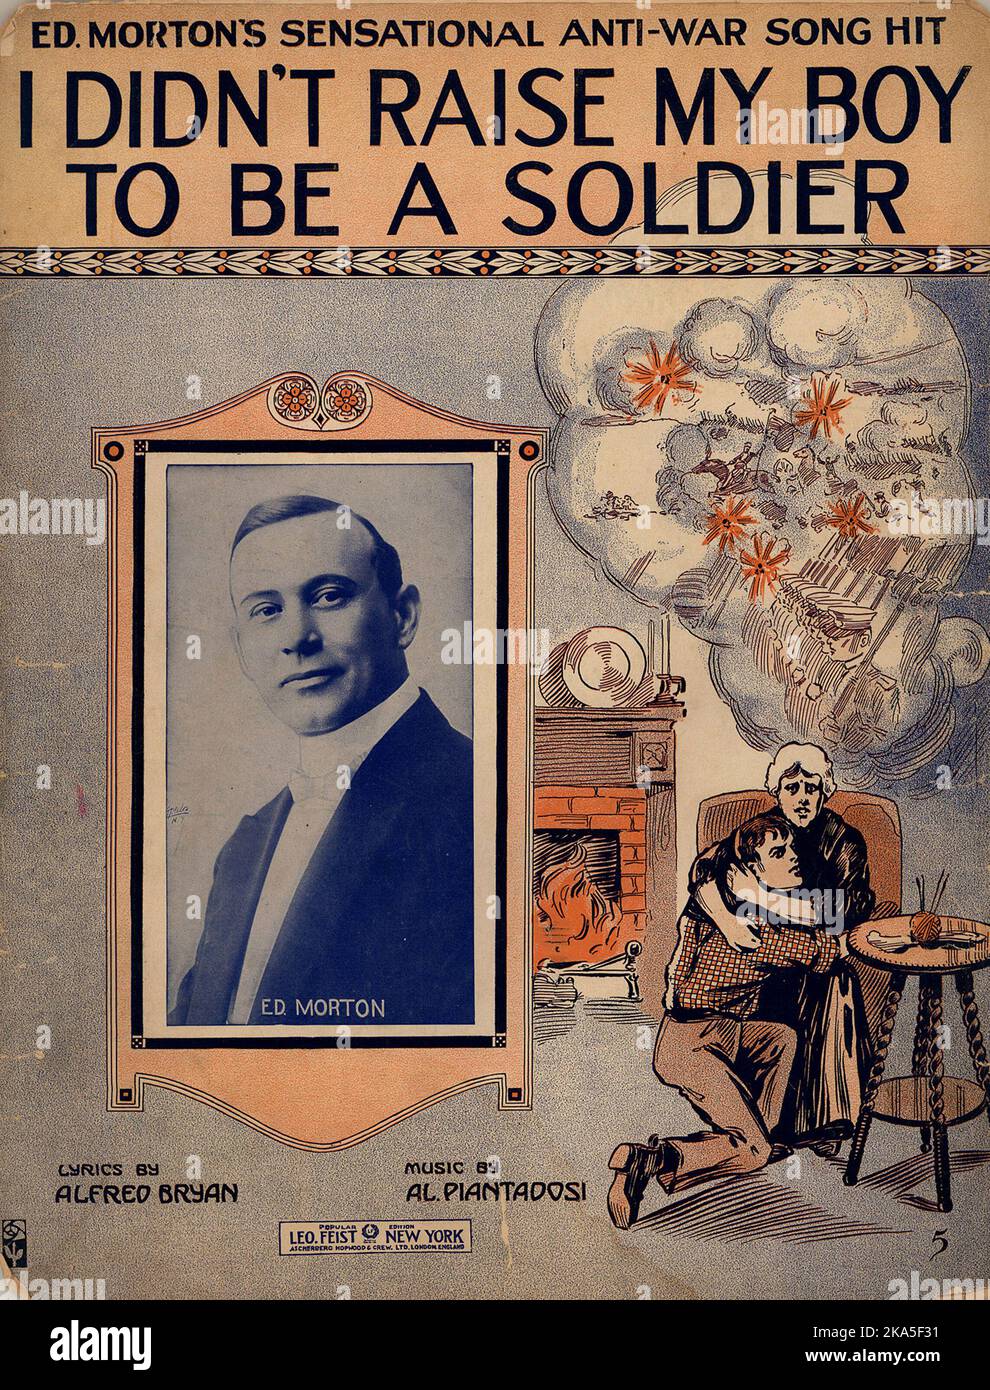 The song 'I Didn't Raise My Boy To Be A Soldier' was a hit in 1915, selling 650,000 copies. Its reflected the popular pacifist and isolationist sentiment. Stock Photo